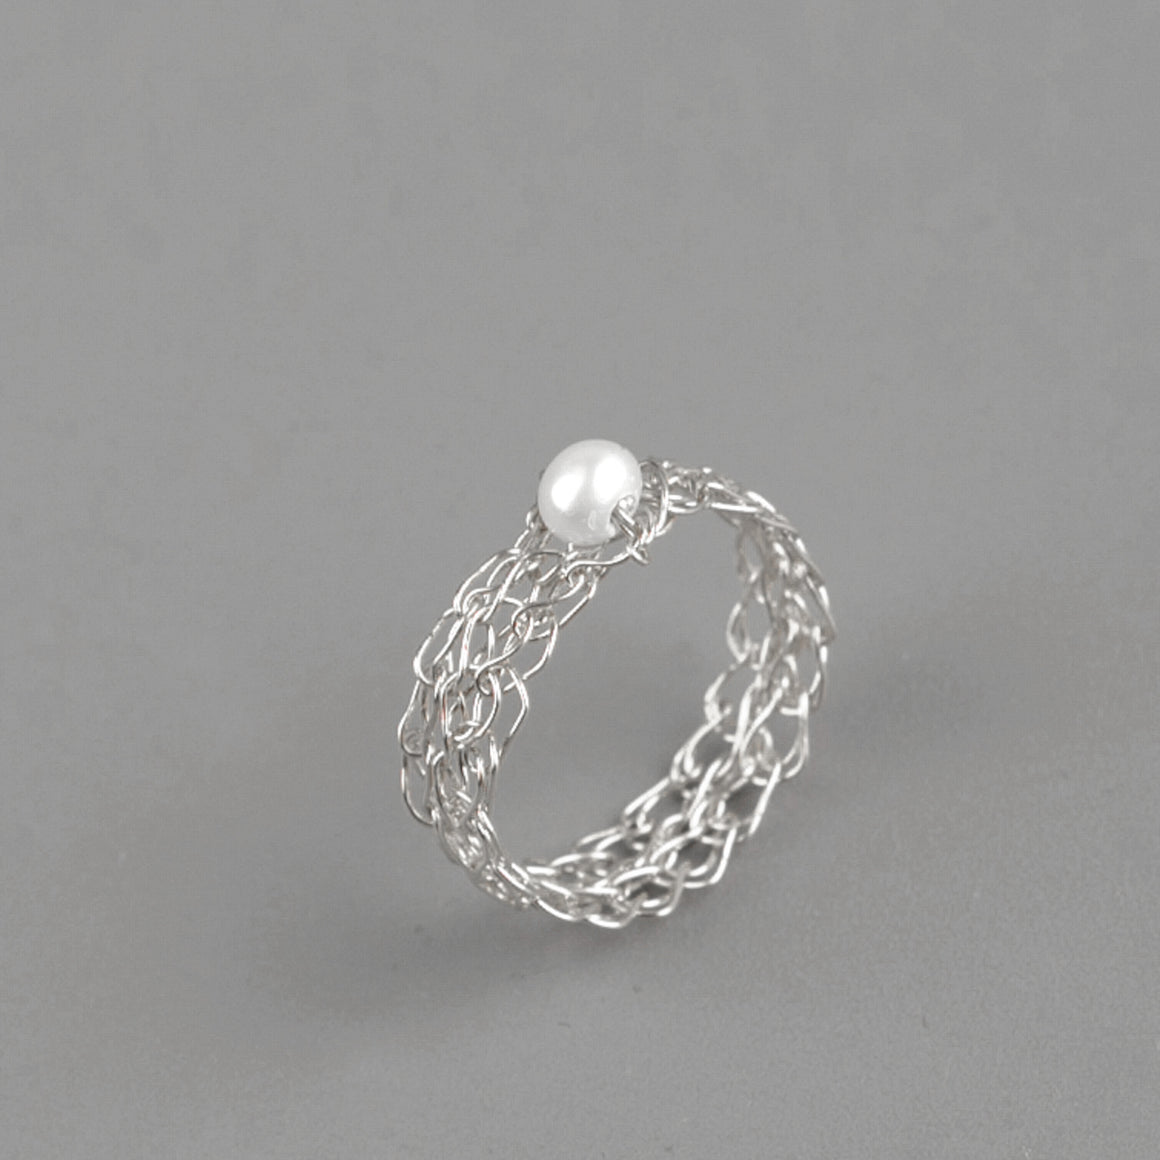 Silver ring with a pearl - Yooladesign